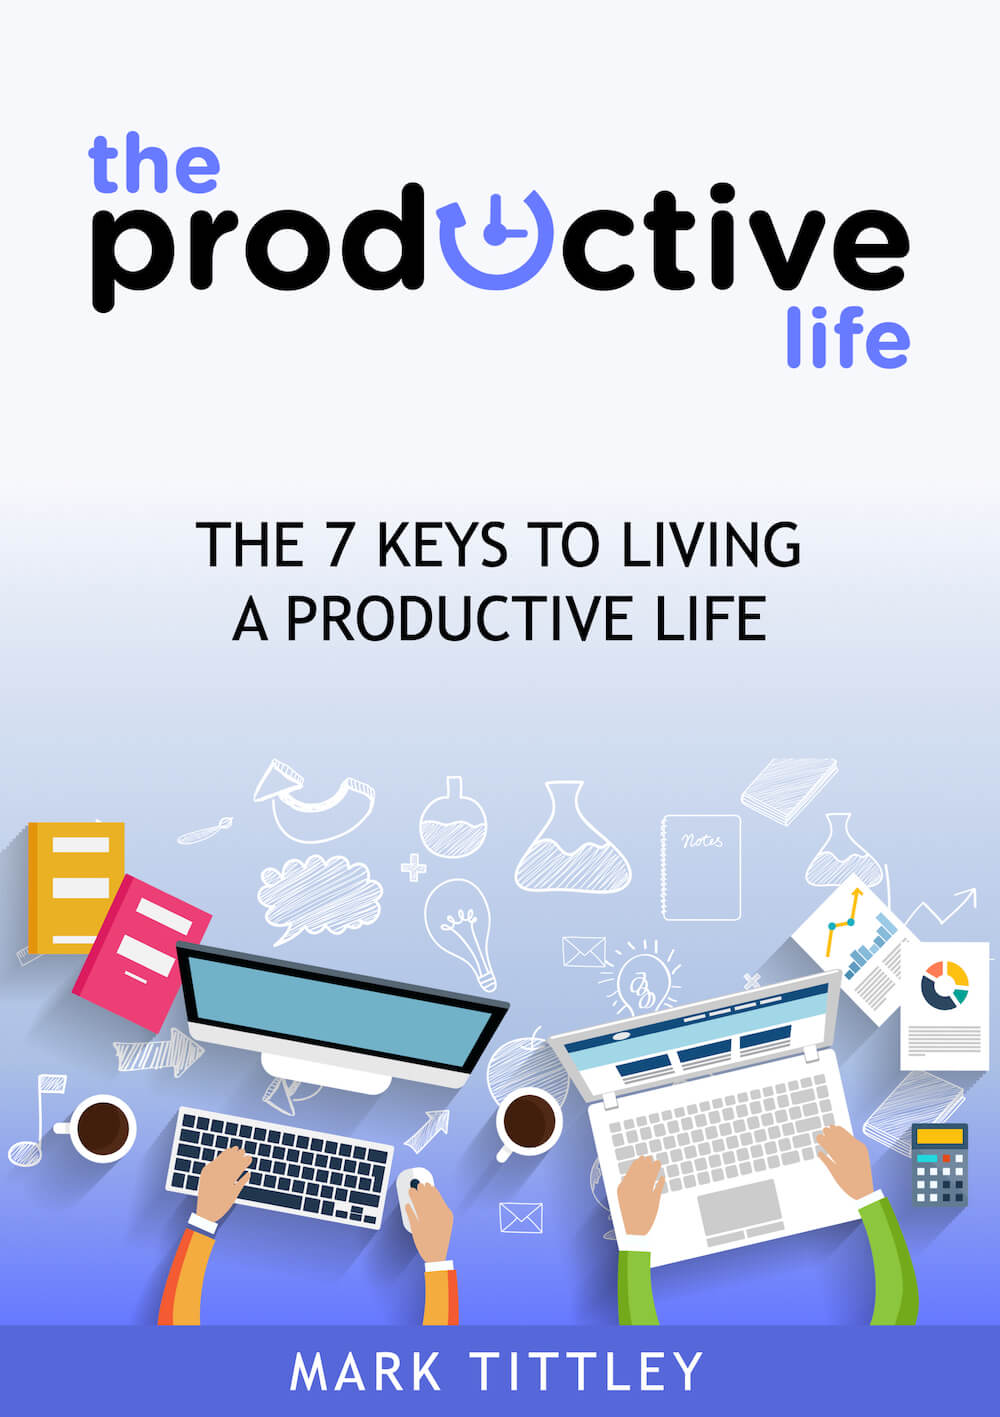 The Productive Life: The 7 Keys to Living a Productive Life by Mark Tittley